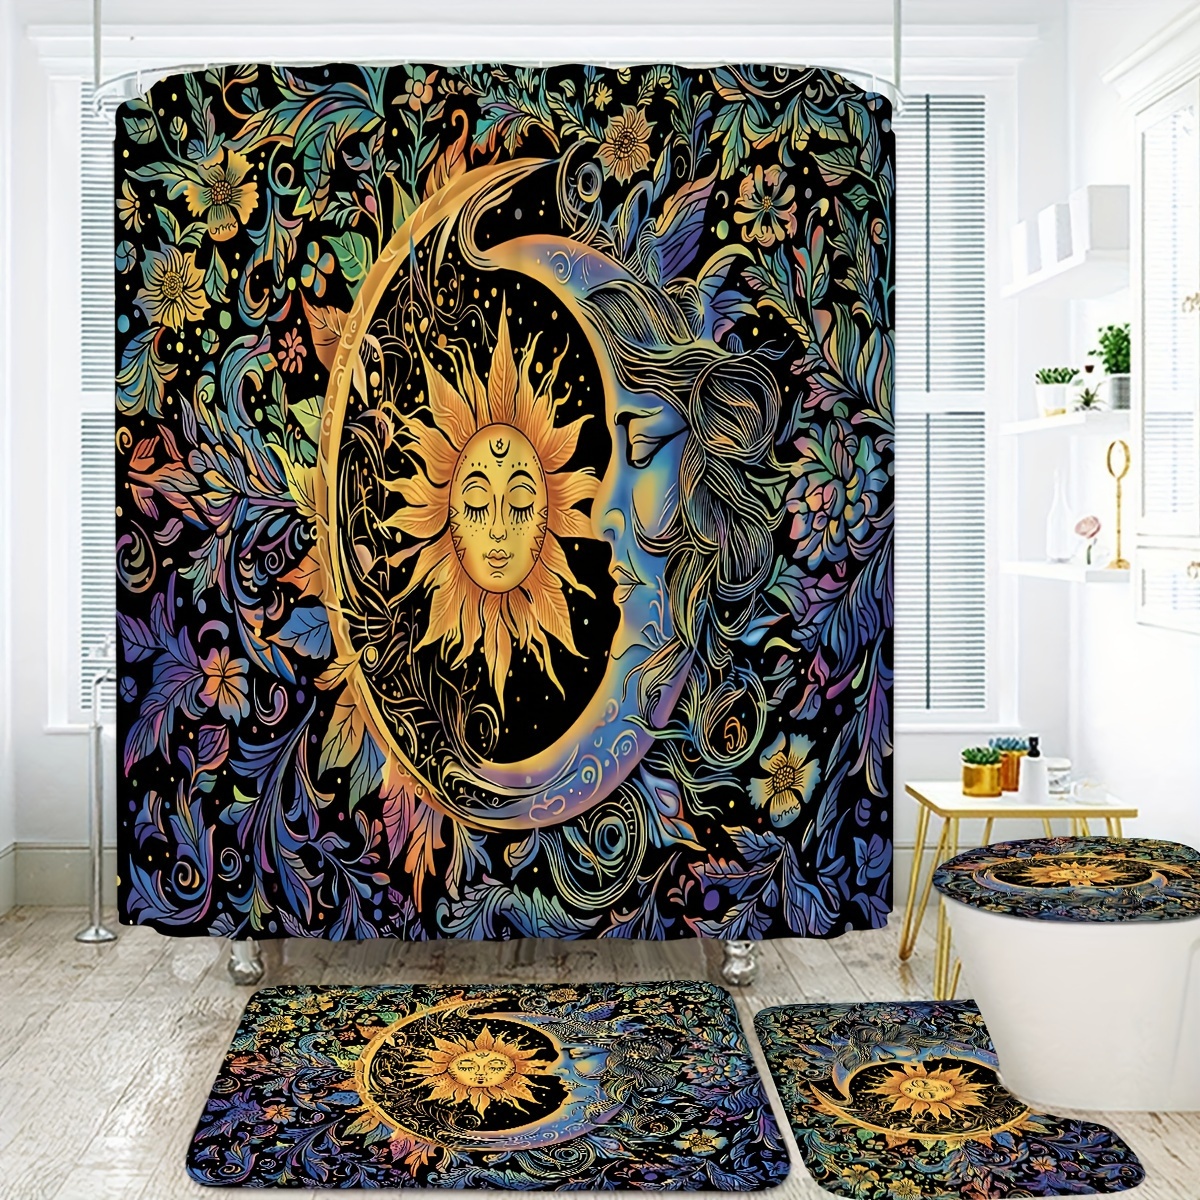 

Bohemian Sun And Moon Shower Curtain Set With 12 Free Hooks: 70.87in X 180cm, Artistic Garden Pattern, Waterproof Polyester, Bath Mat, Toilet Seat Cover, And U-shaped Mat - Modern Bathroom Decor